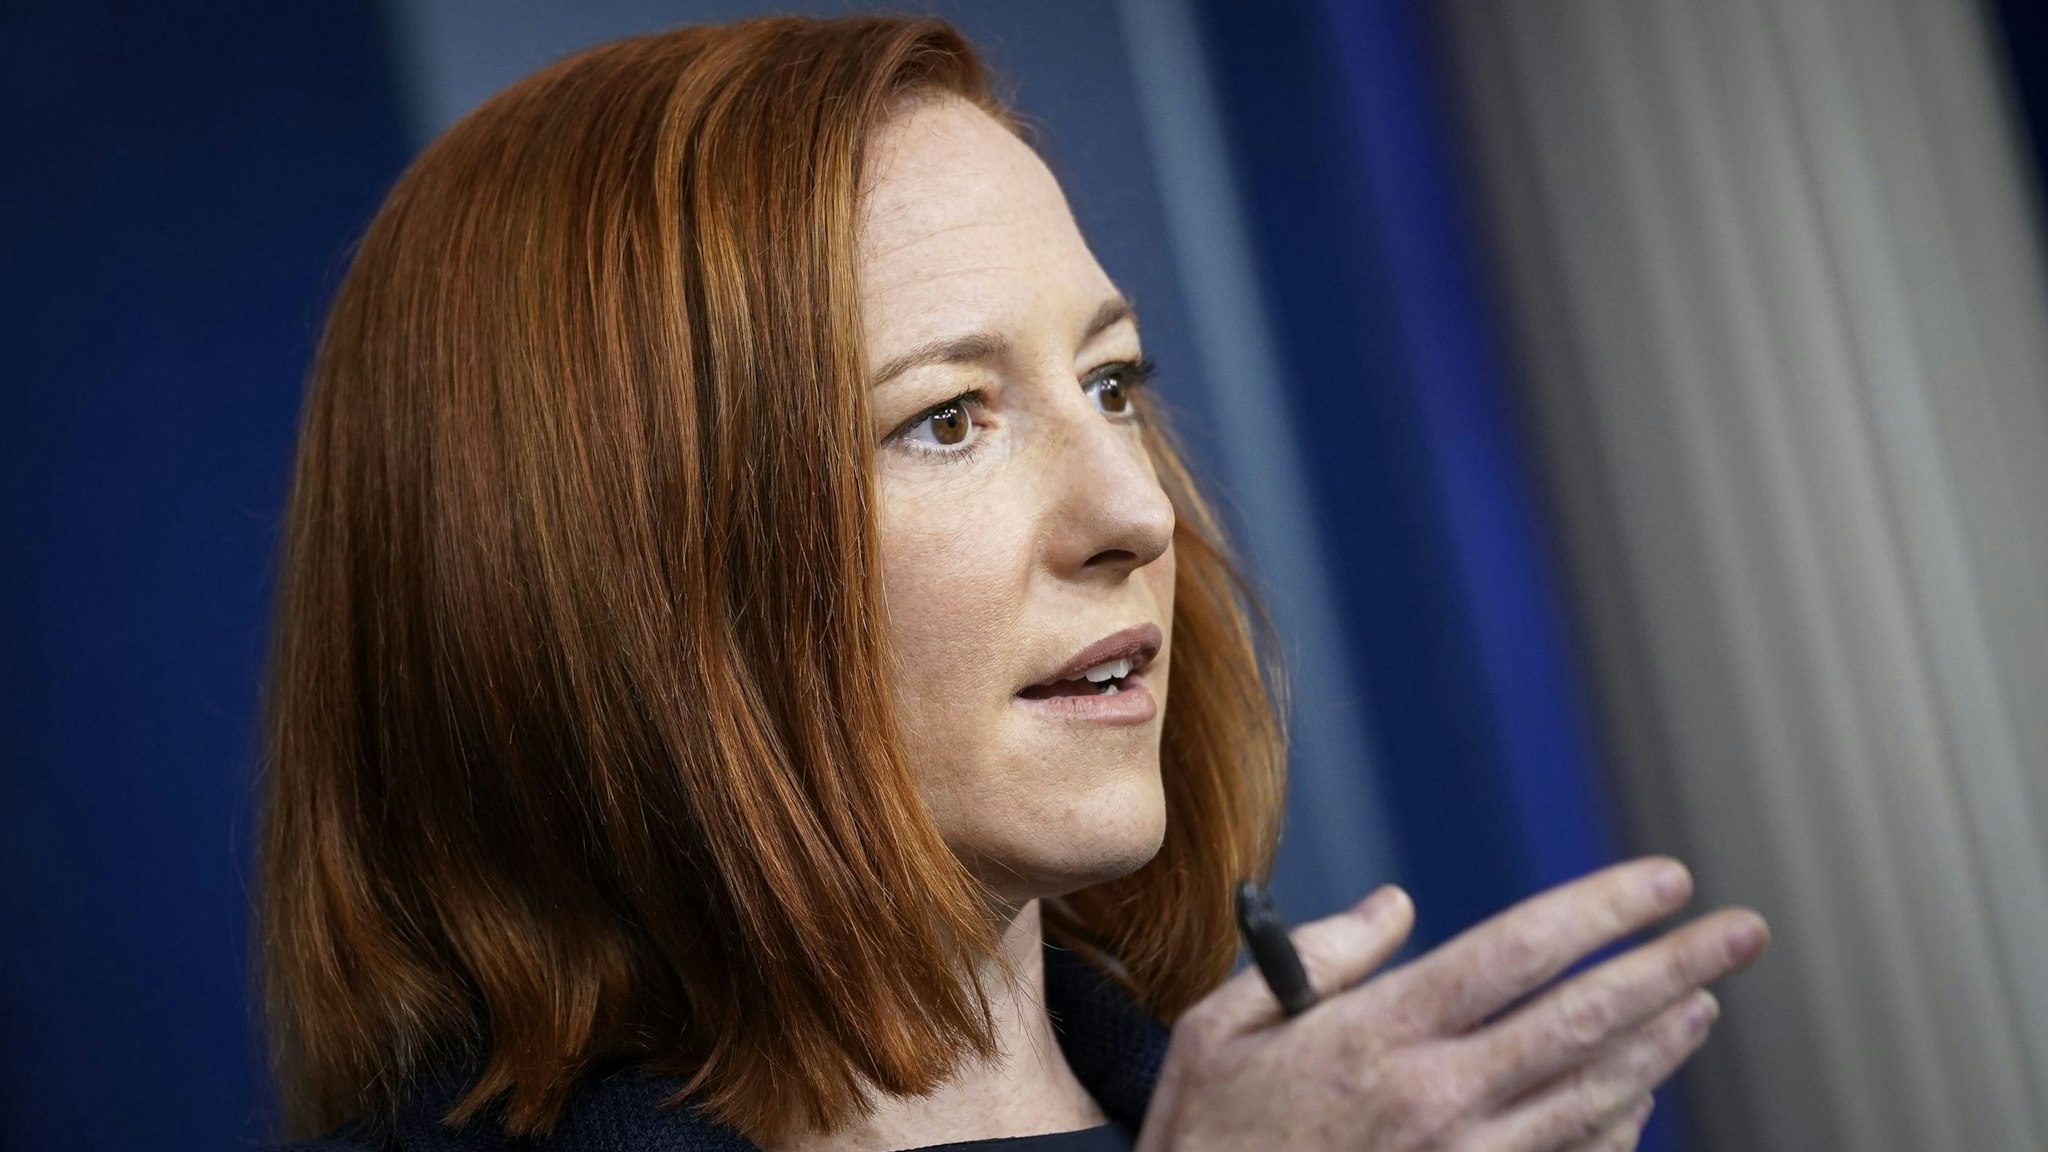 WASHINGTON, DC - MARCH 29: White House Press Secretary Jen Psaki speaks during the daily press briefing at the White House on March 29, 2021 in Washington, DC. Later on Monday, President Joe Biden will deliver remarks on the COVID-19 response and the state of vaccinations.